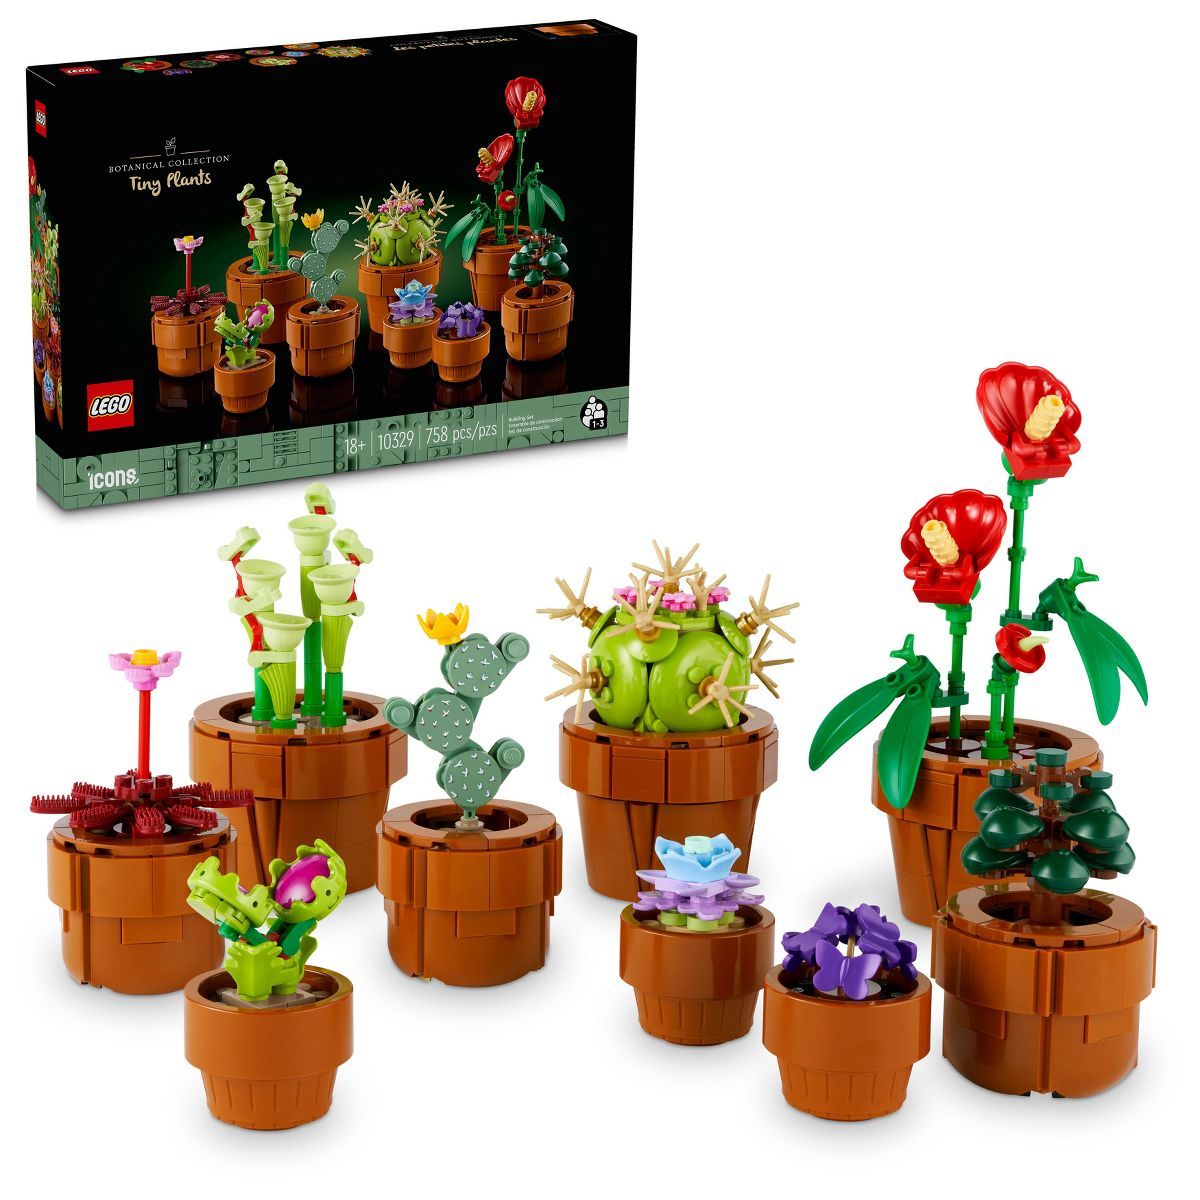 LEGO Icons Tiny Plants Build and Display Set for Adults 10329 | Target